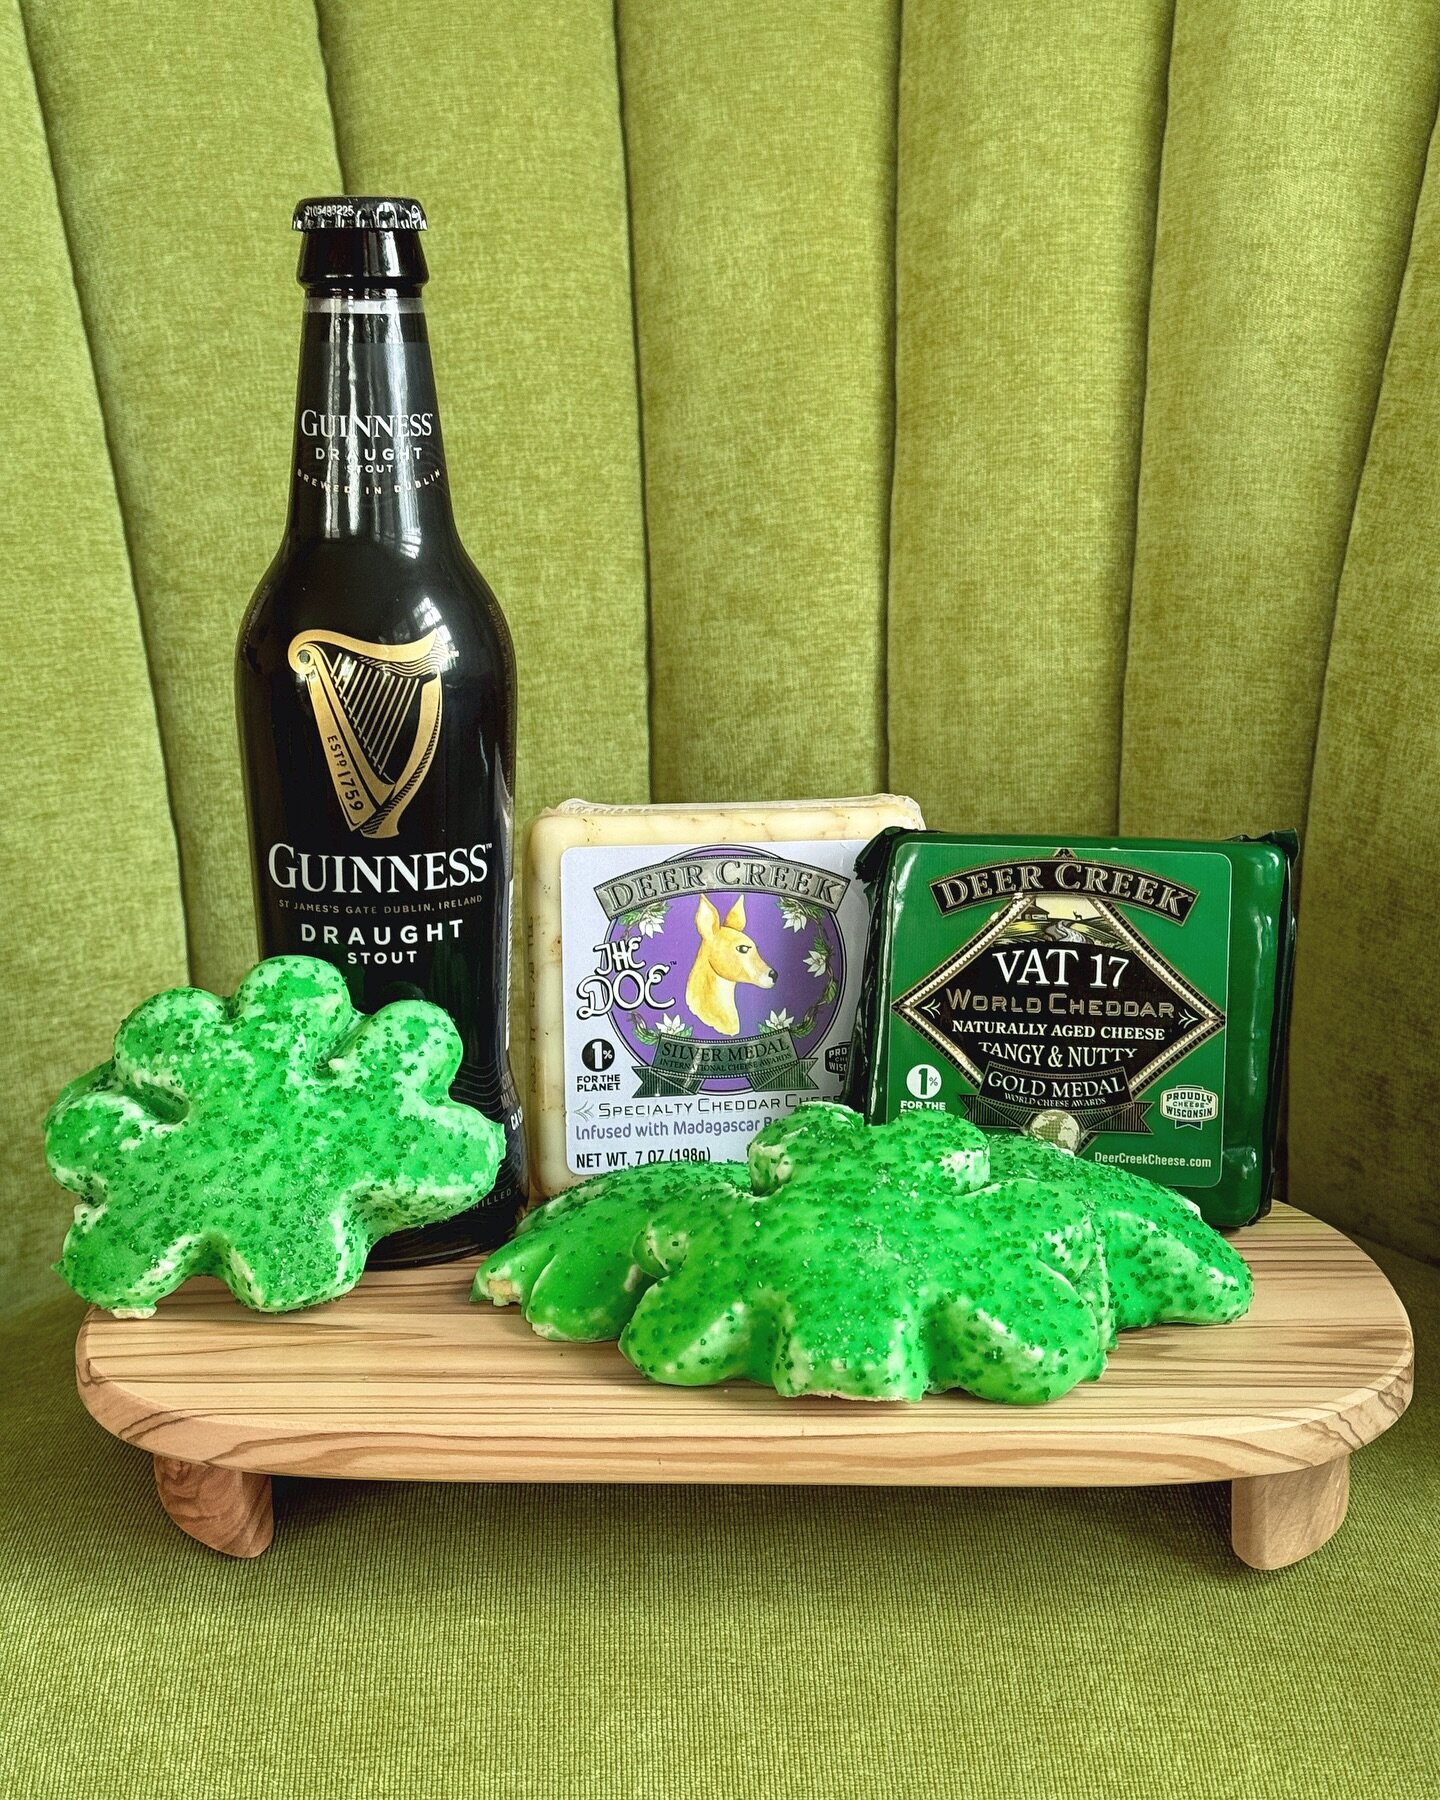 Happy St. Patrick&rsquo;s Day, everyone! 🍀🧡 We&rsquo;re celebrating by pairing @guinness with The Doe, Vat 17, and shamrock butter cookies from @sendiks. Have fun today and stay safe. 🤗 

#deercreekcheese #wisconsincheese #stpatricksday